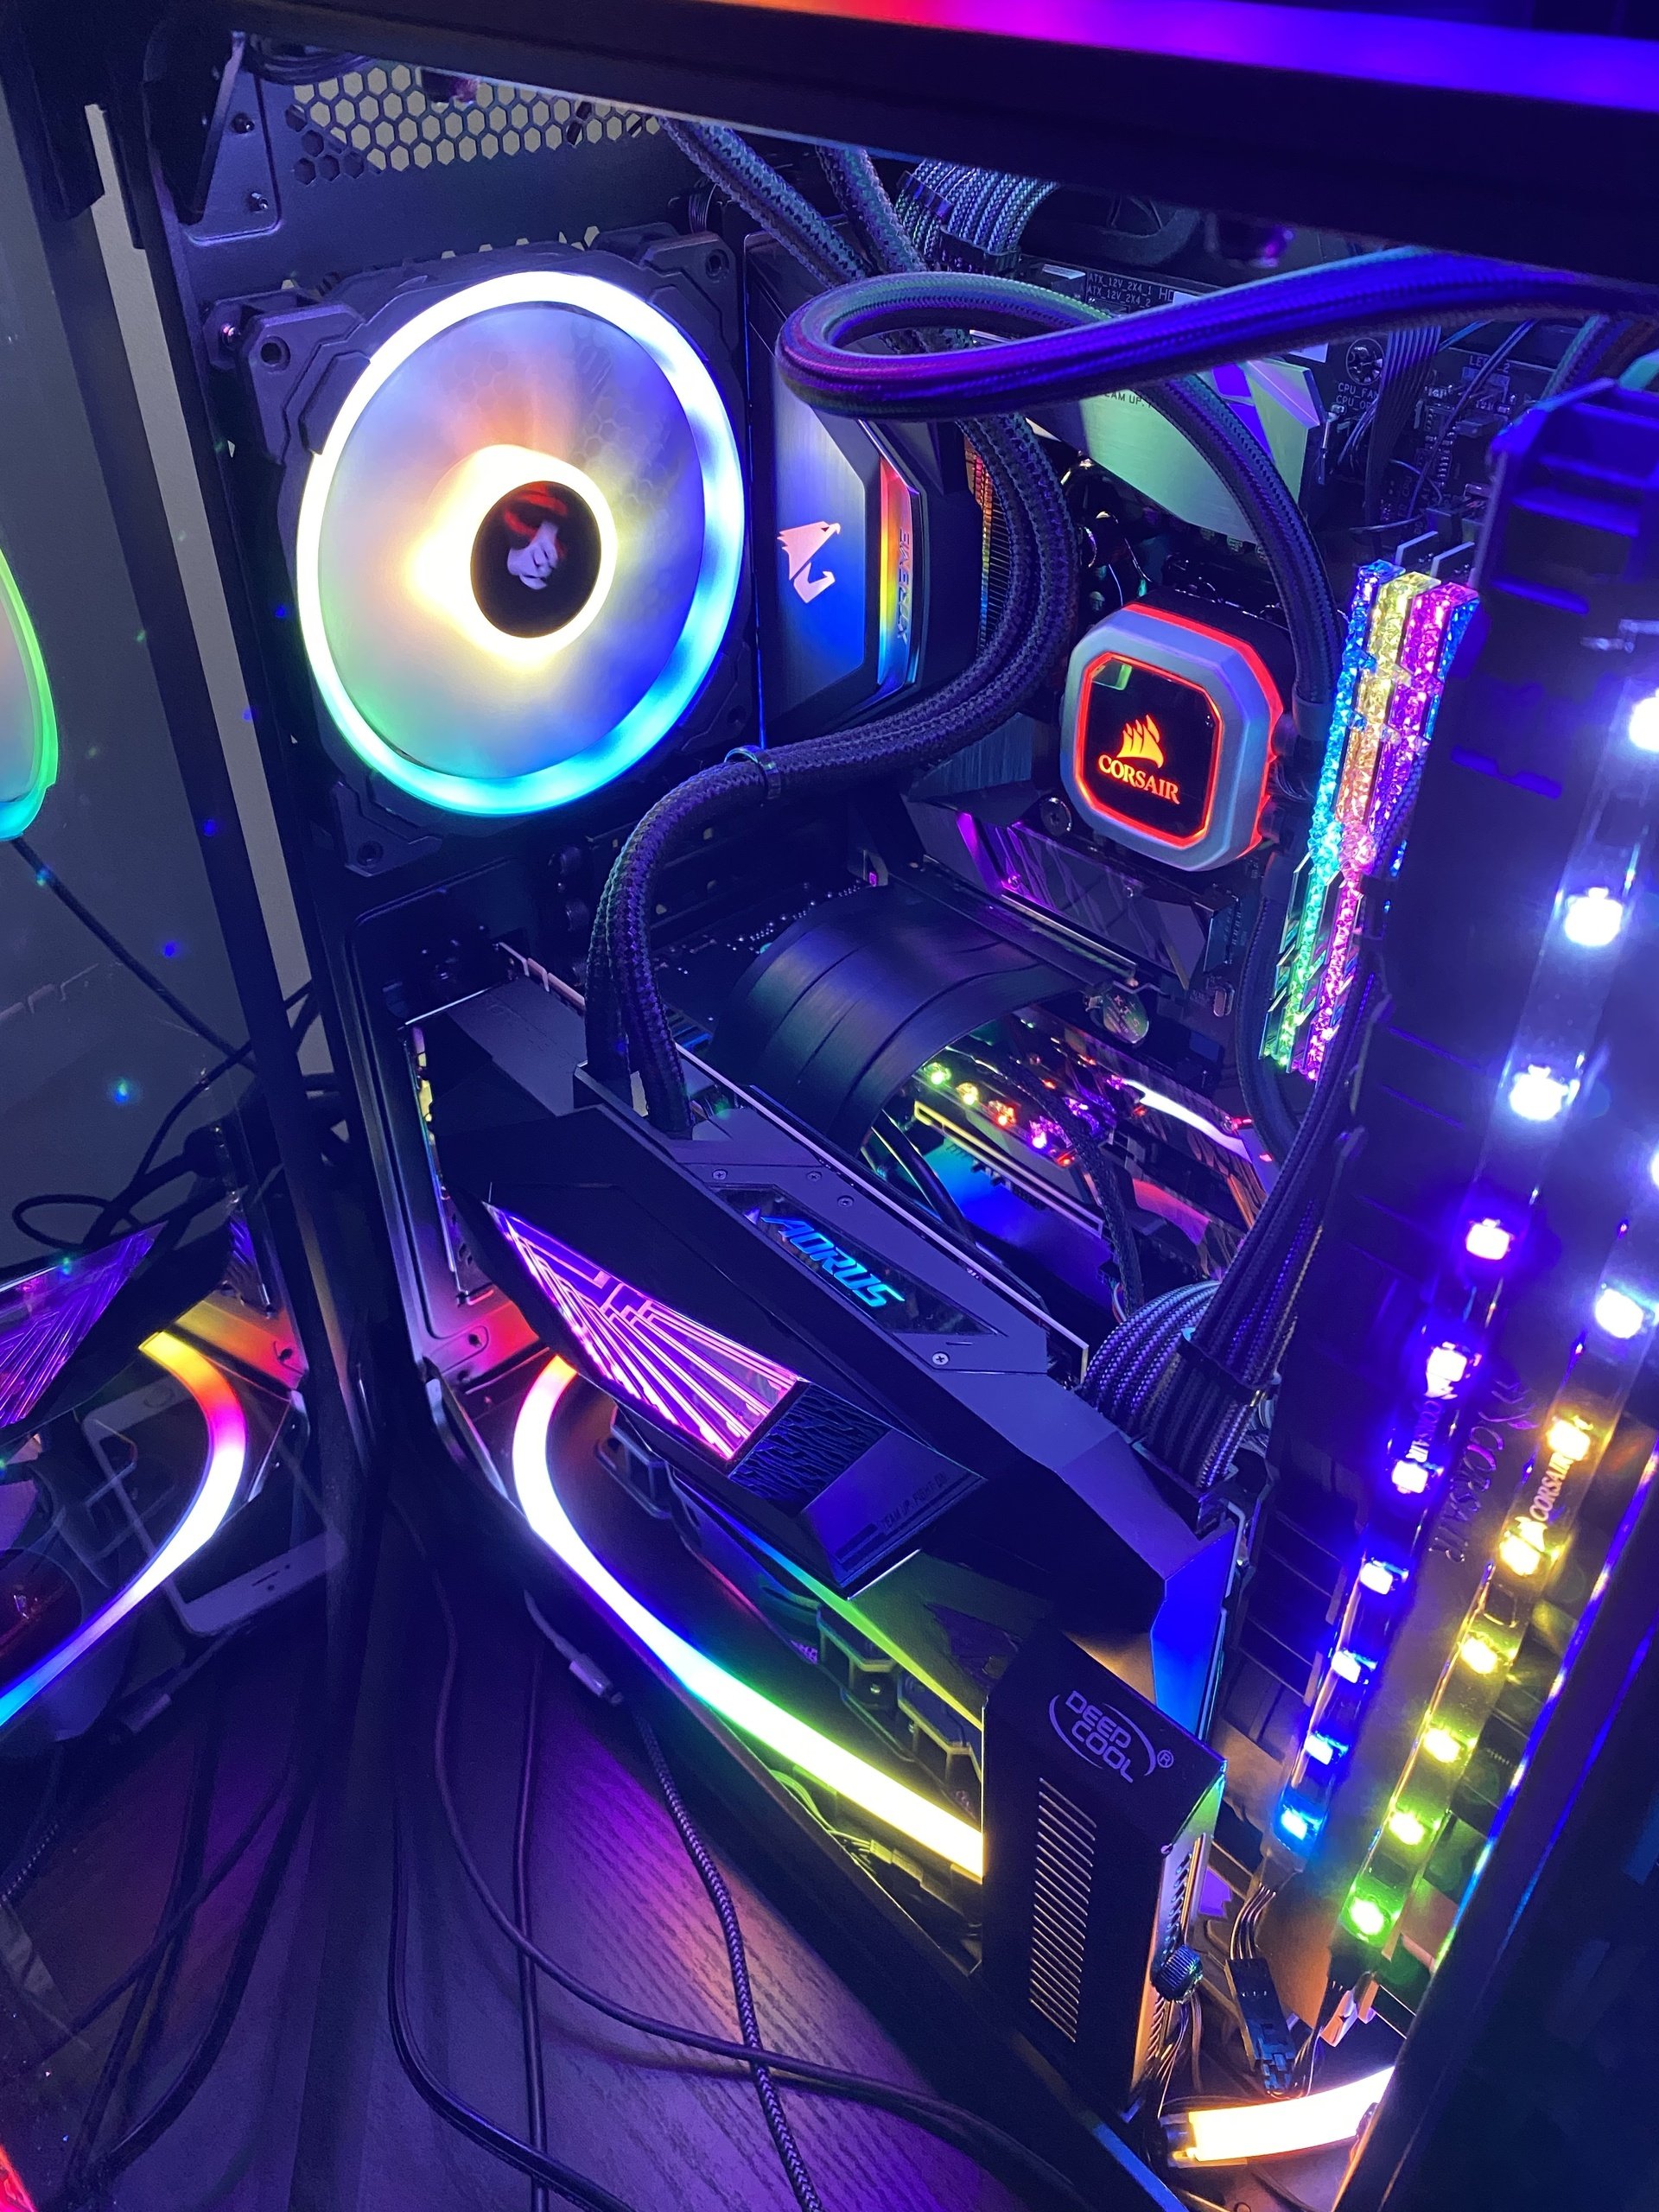 RGB Gaming Beast Dream PC come to life. If you like RGB you'll want to ...